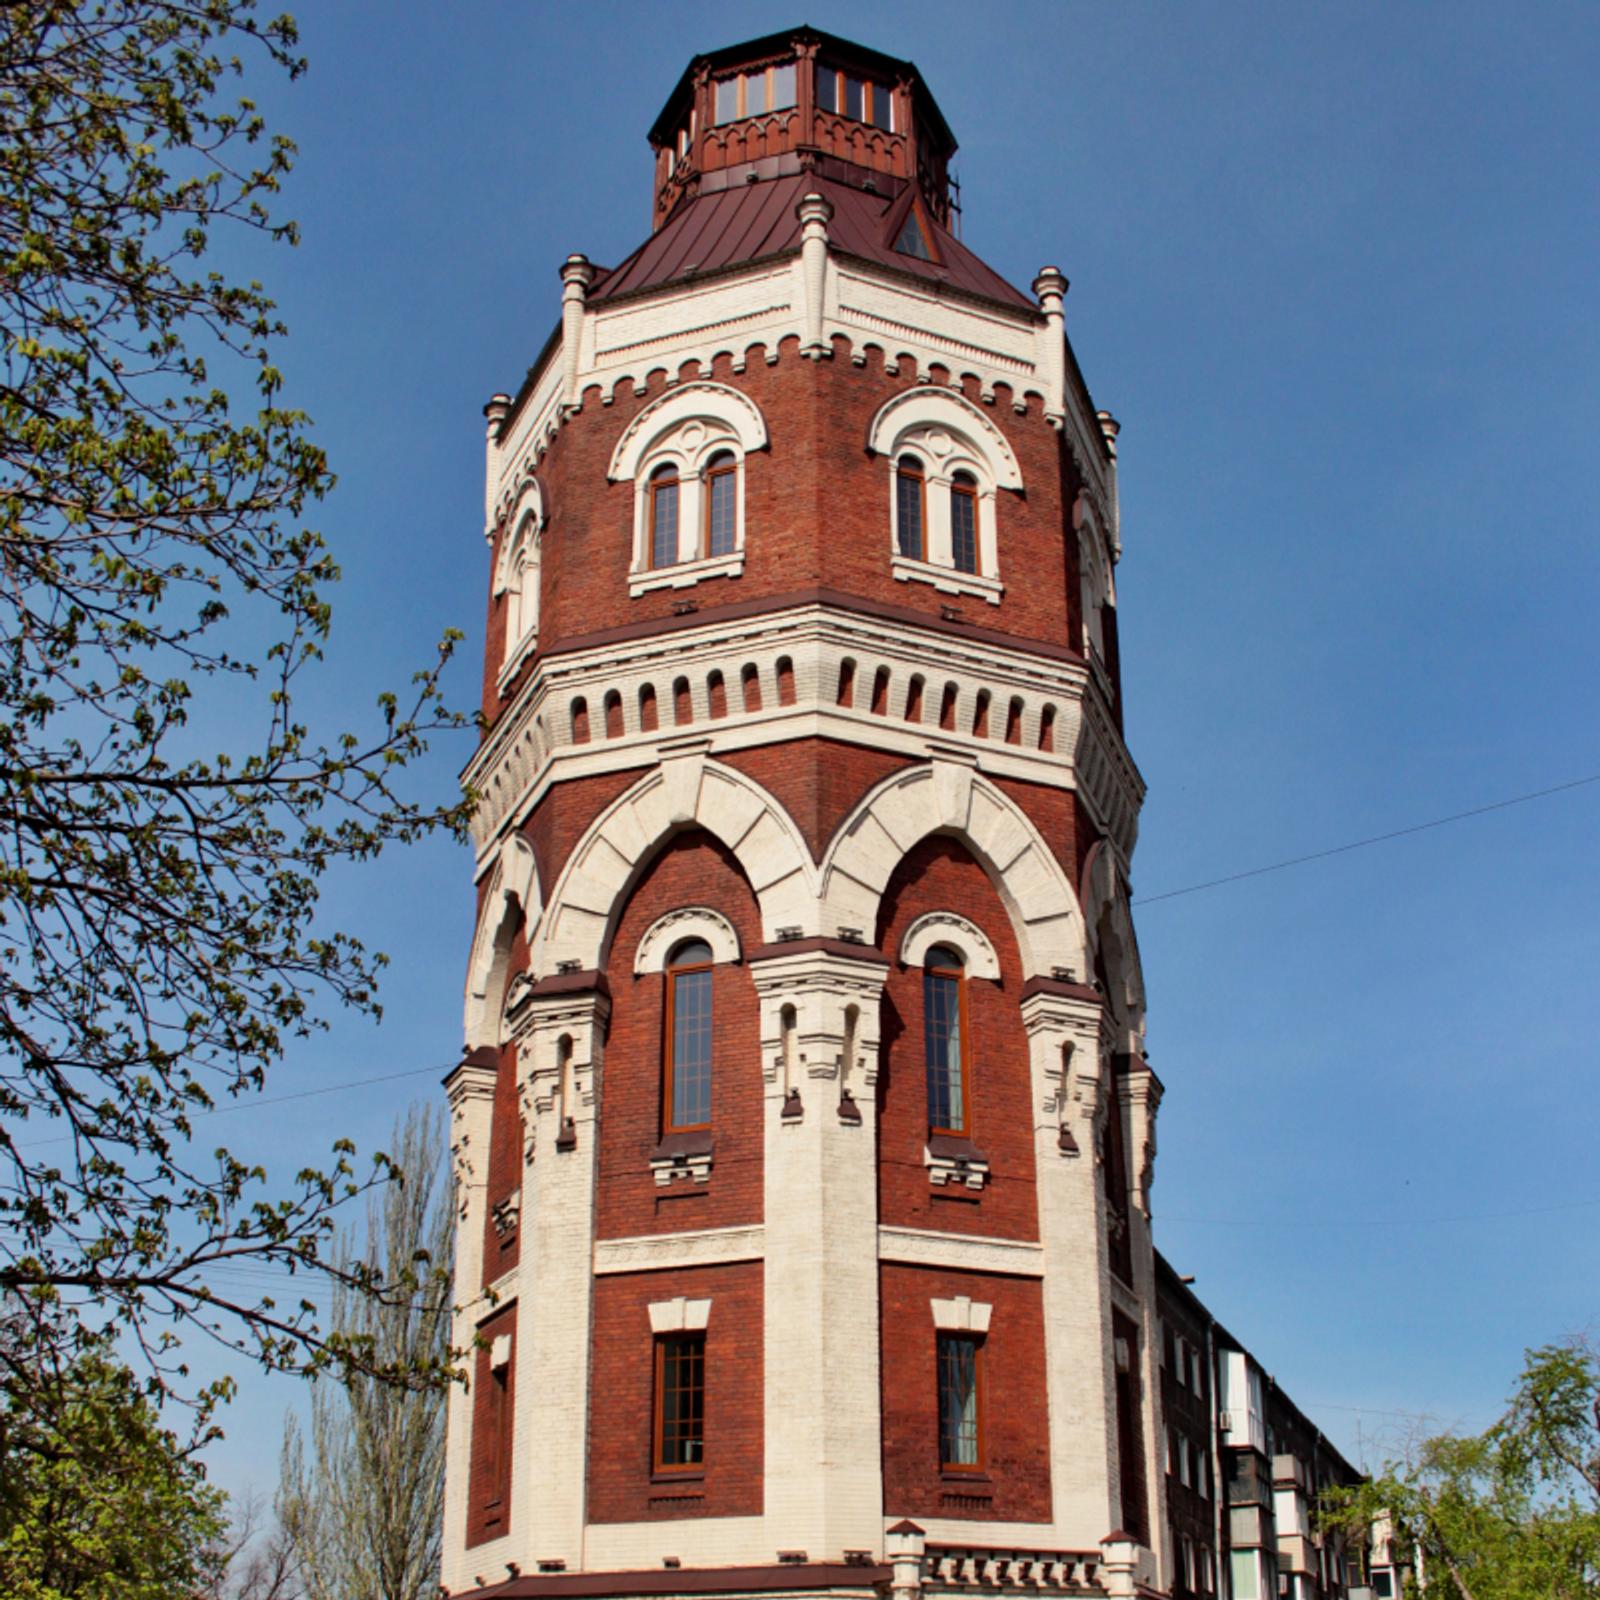 The Old Water Tower. Mariupol